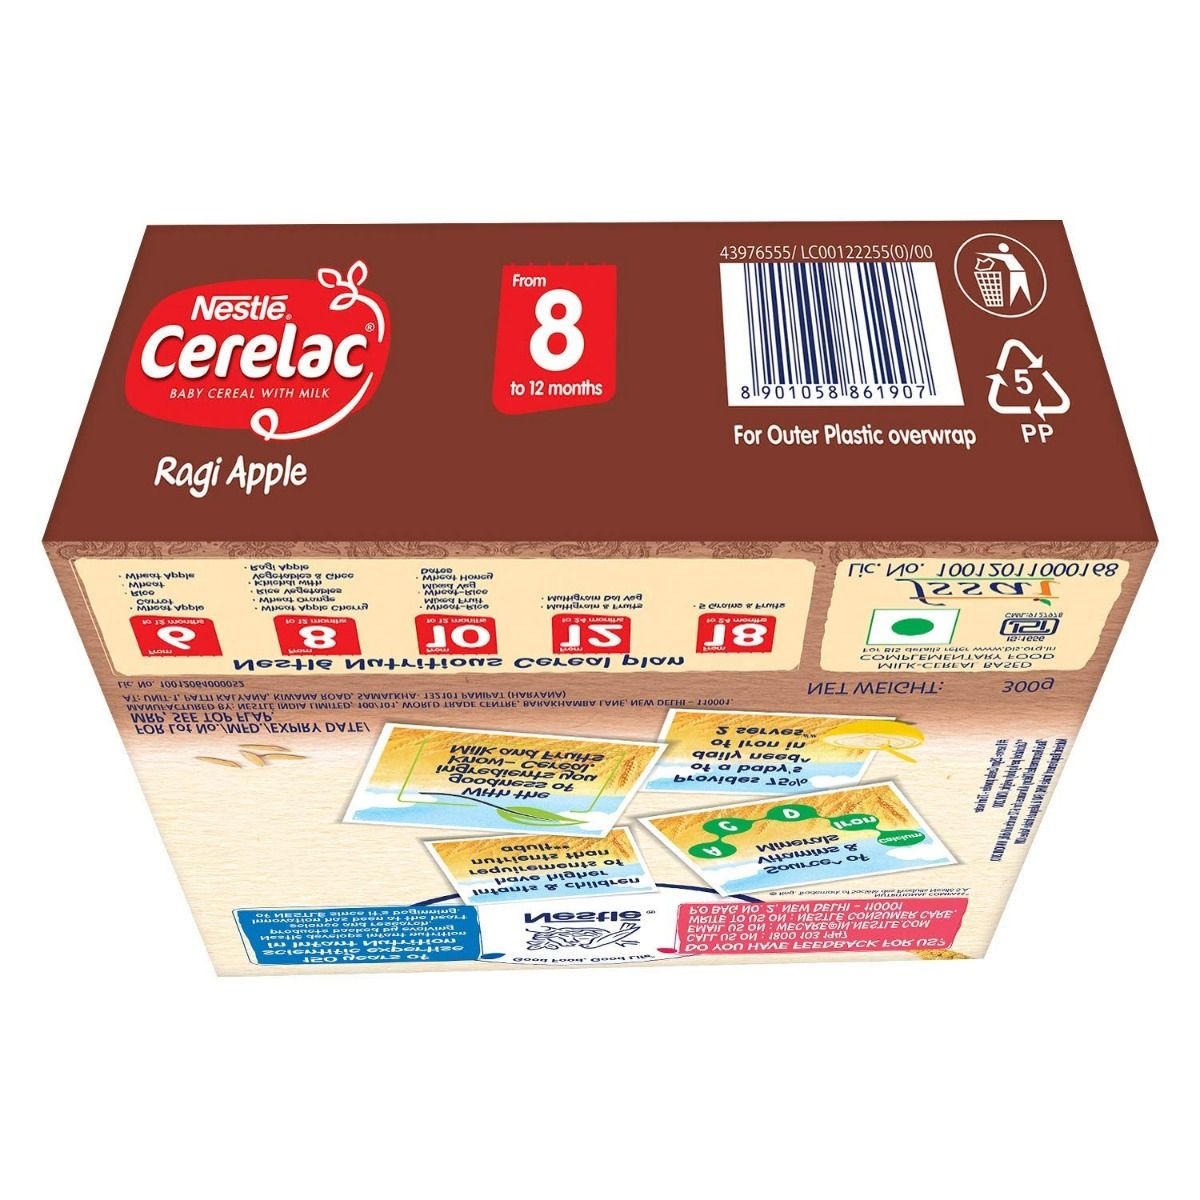 Nestle Cerelac Baby Cereal with Milk Ragi Apple Powder, 300 gm Refill Pack, Pack of 1 